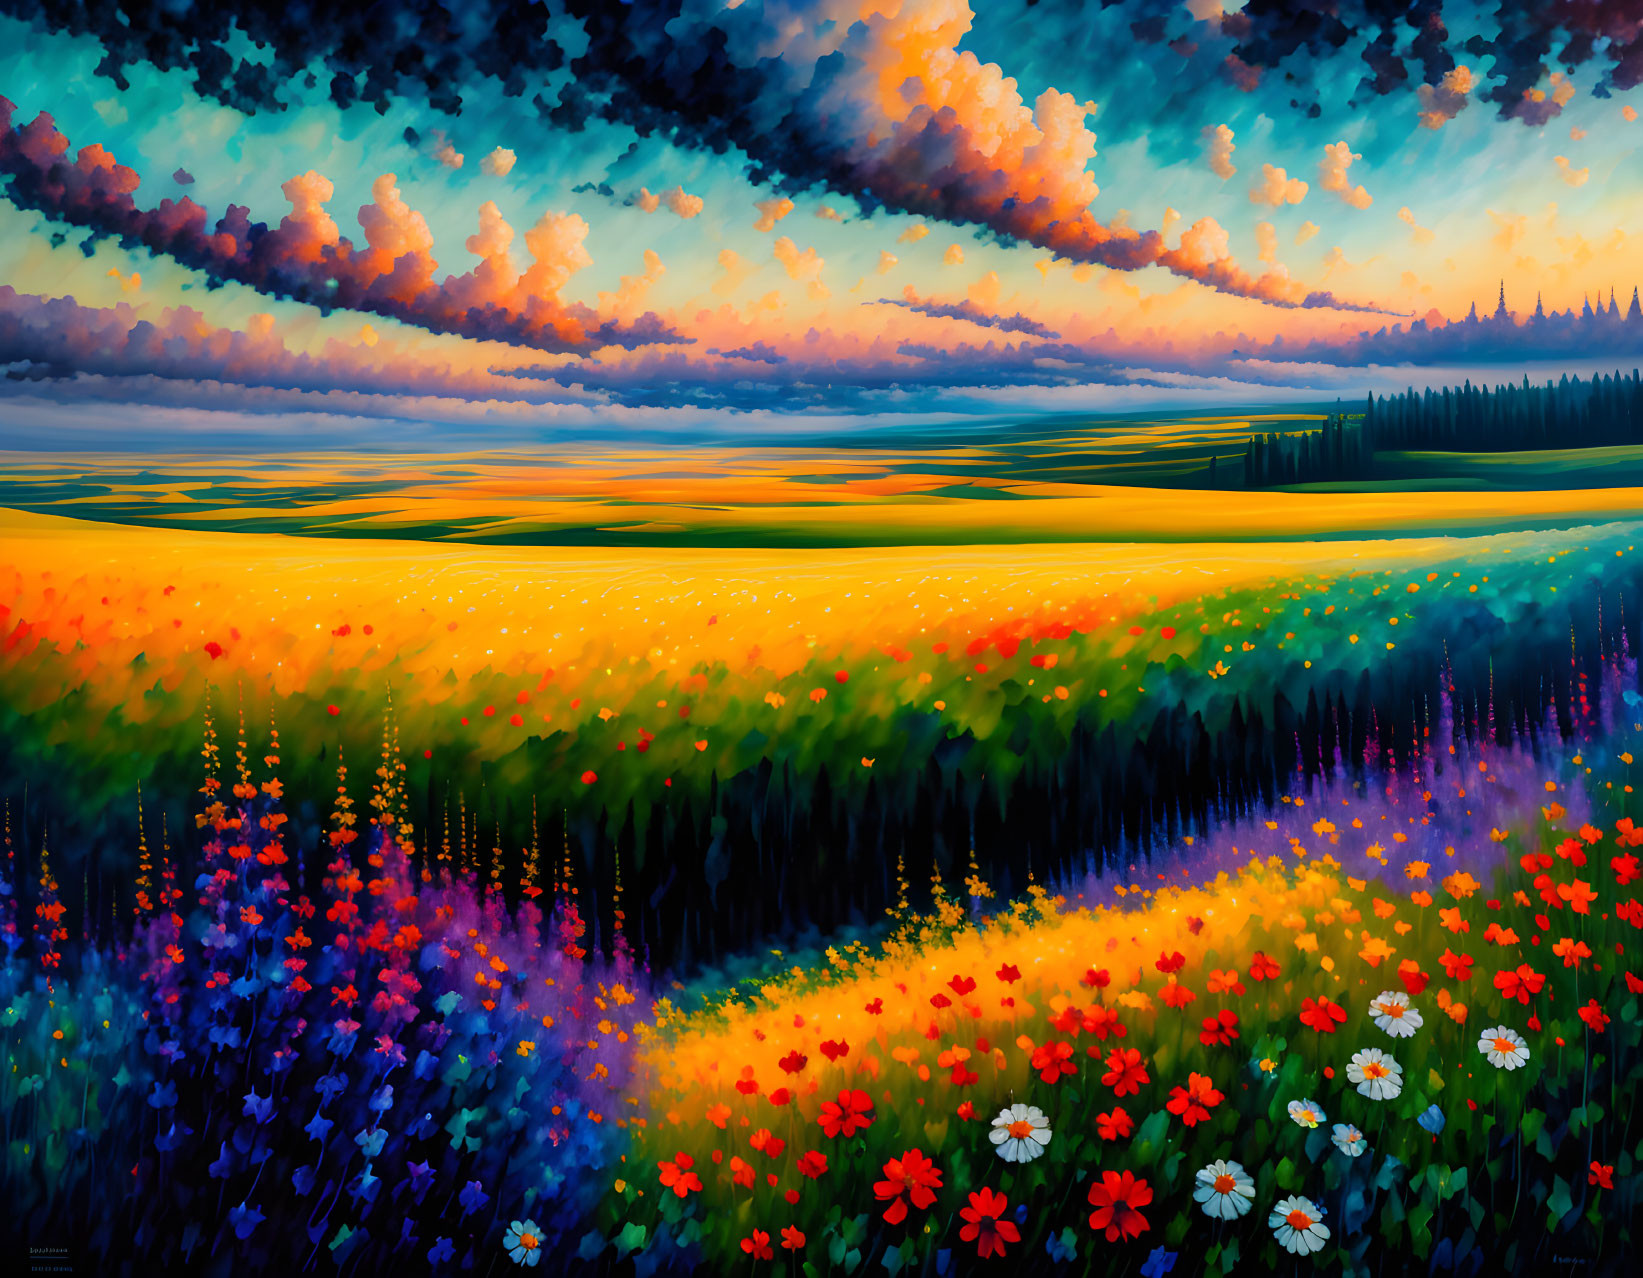 Colorful Flower-Filled Meadow Painting at Sunset